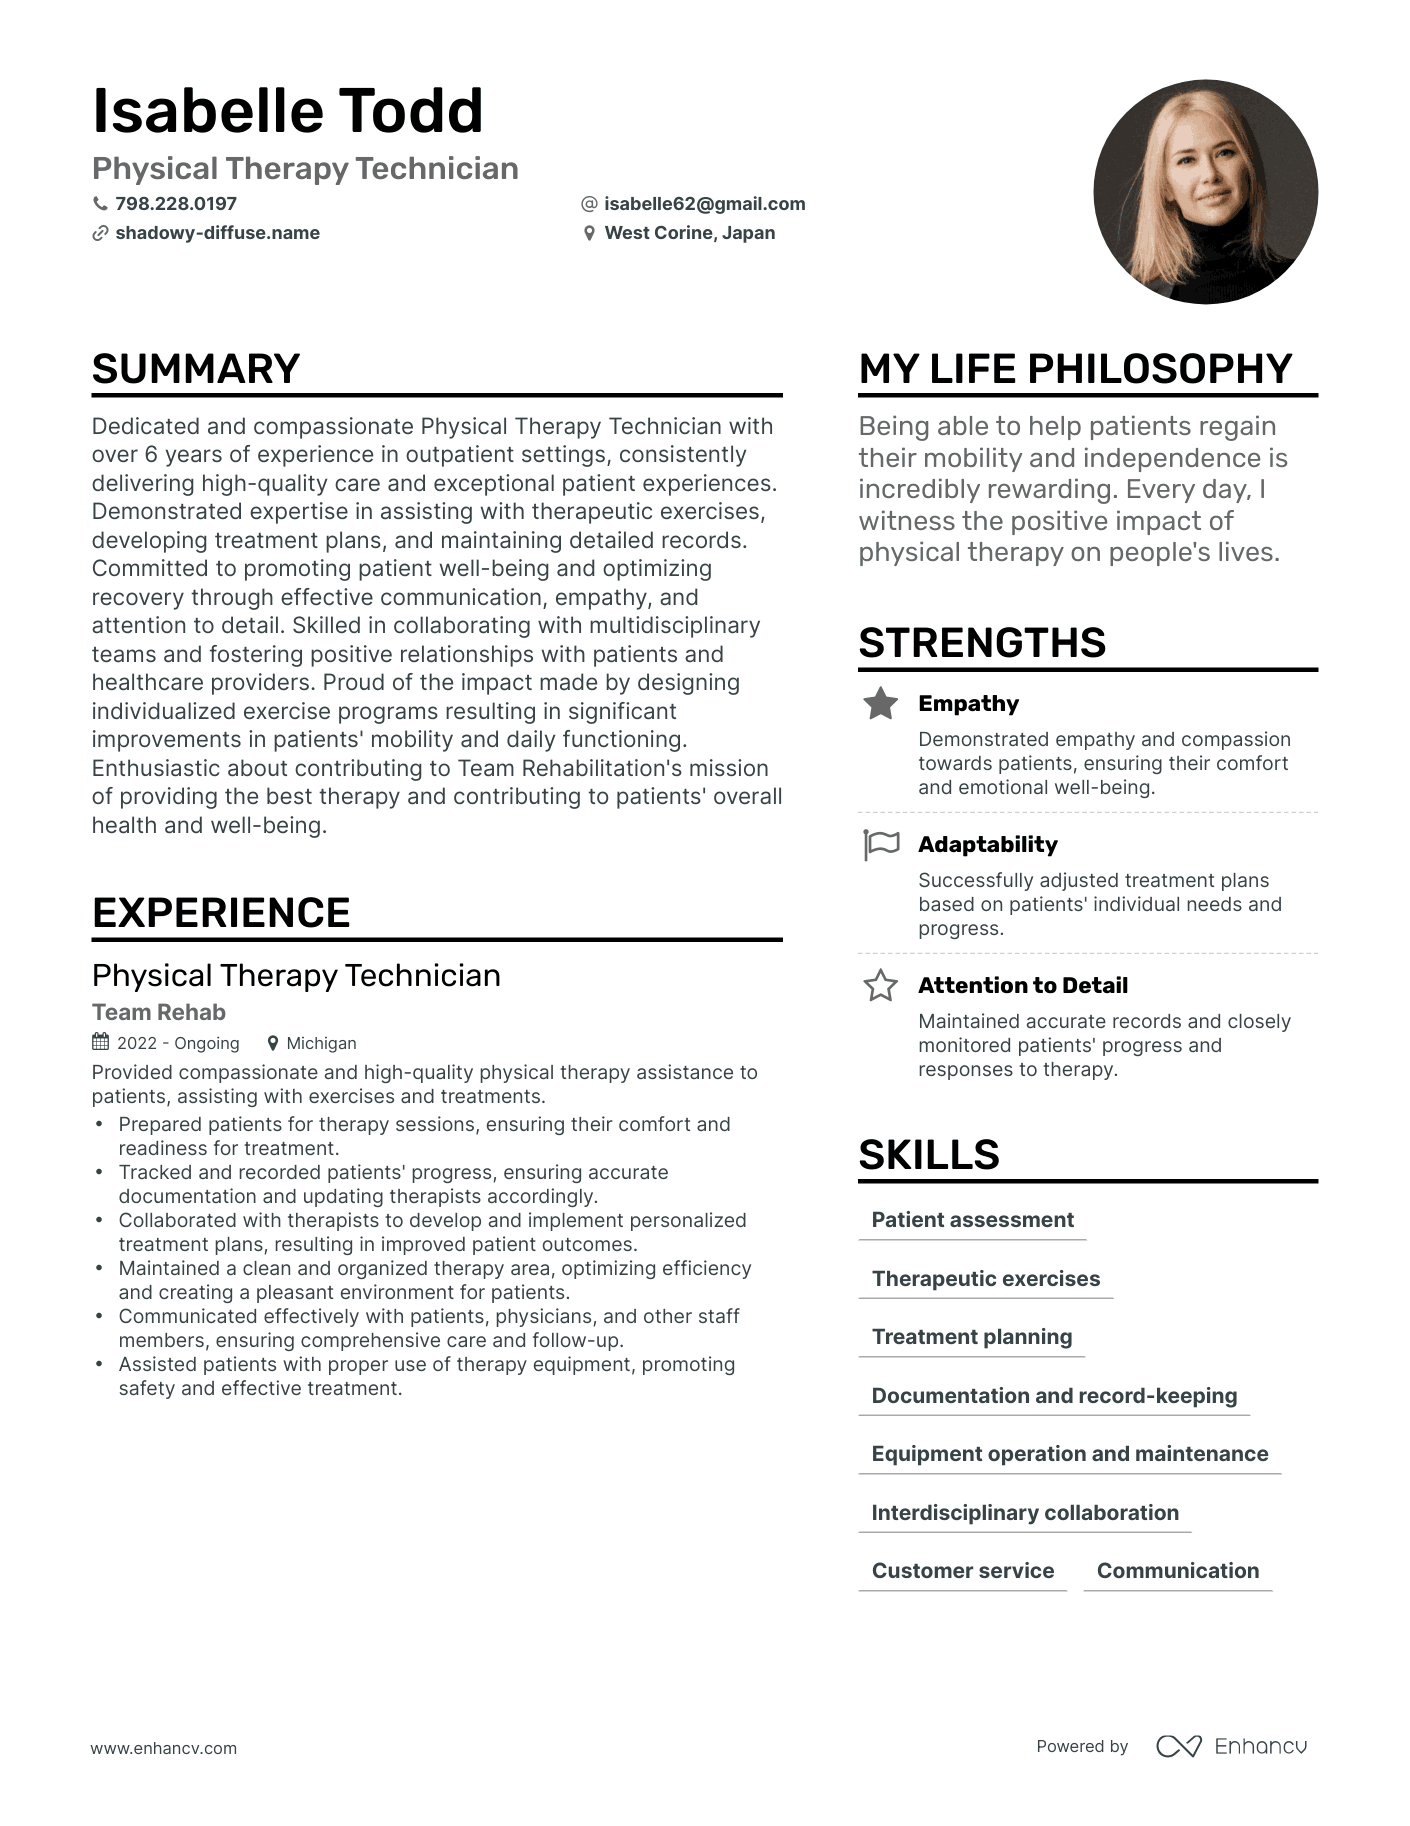 Physical Therapy Technician resume example